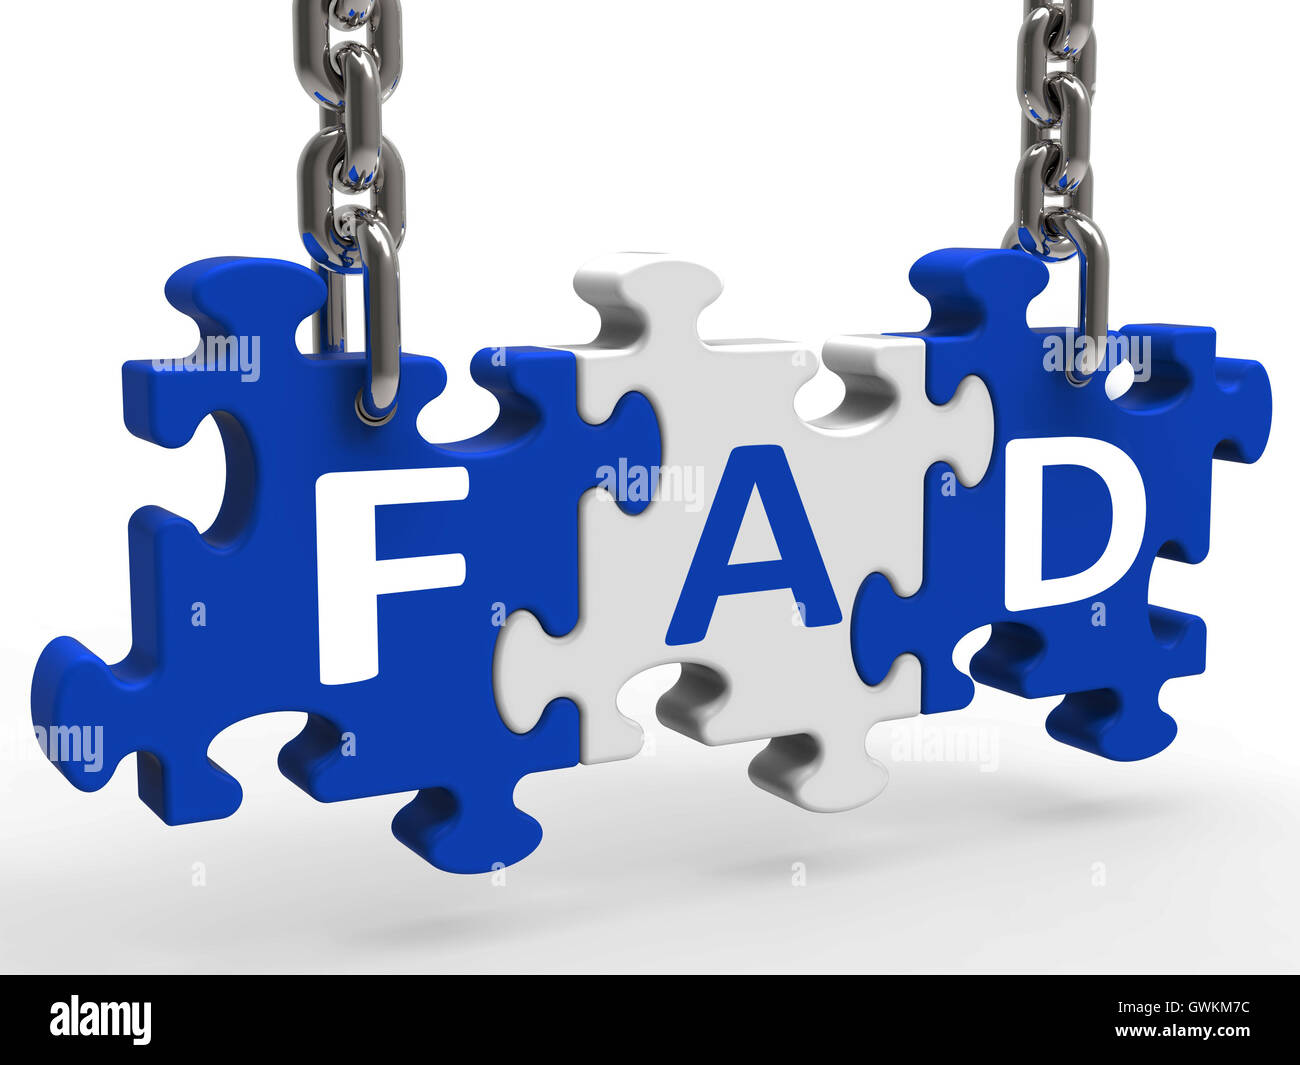 Fad Puzzle Shows Latest Thing Or Craze Stock Photo